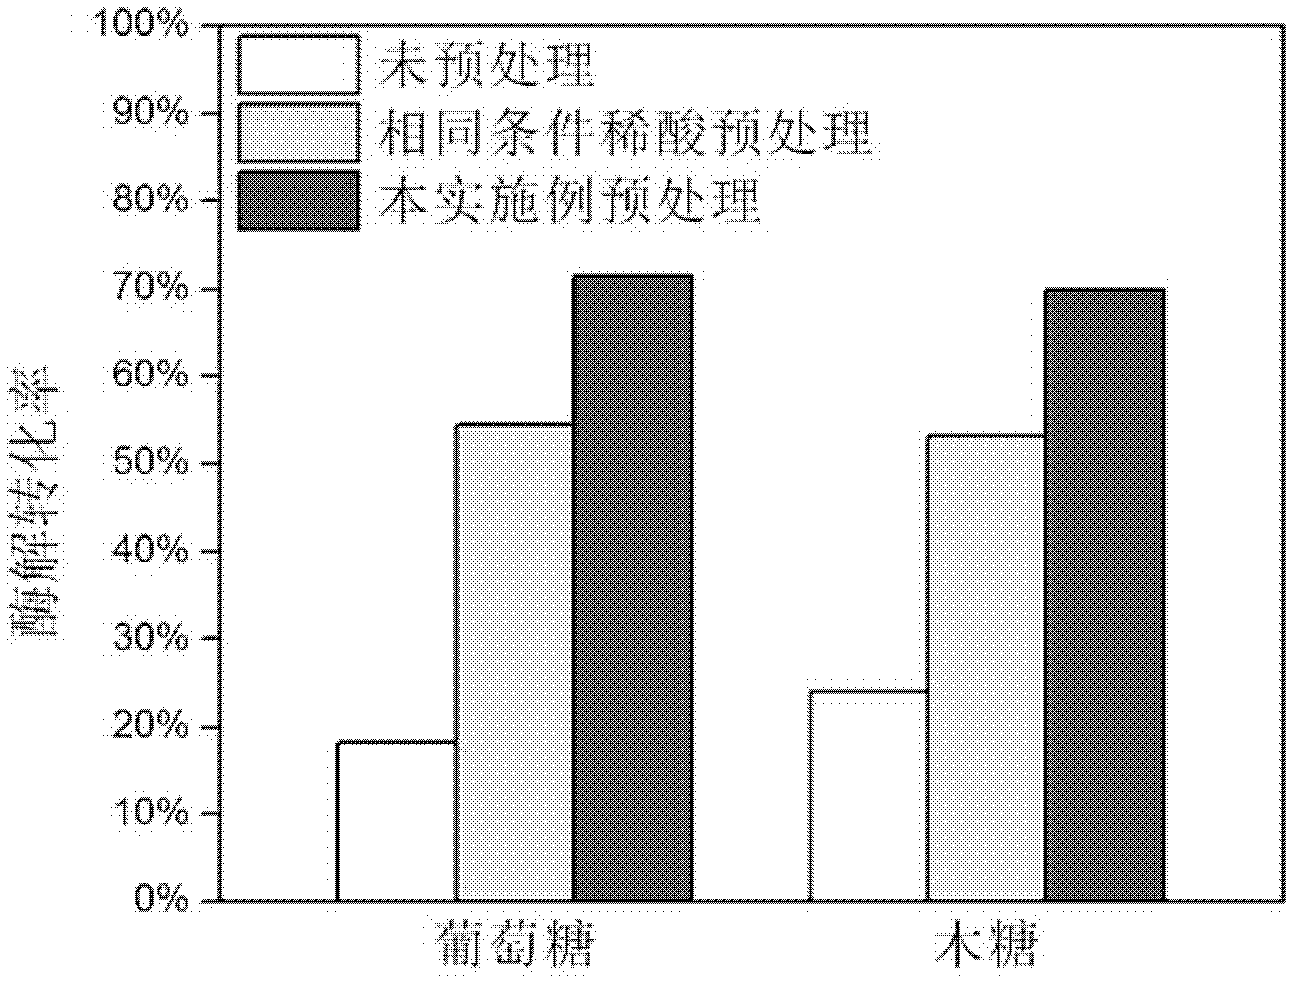 Method for improving lignocellulose enzymolysis and saccharification efficiency